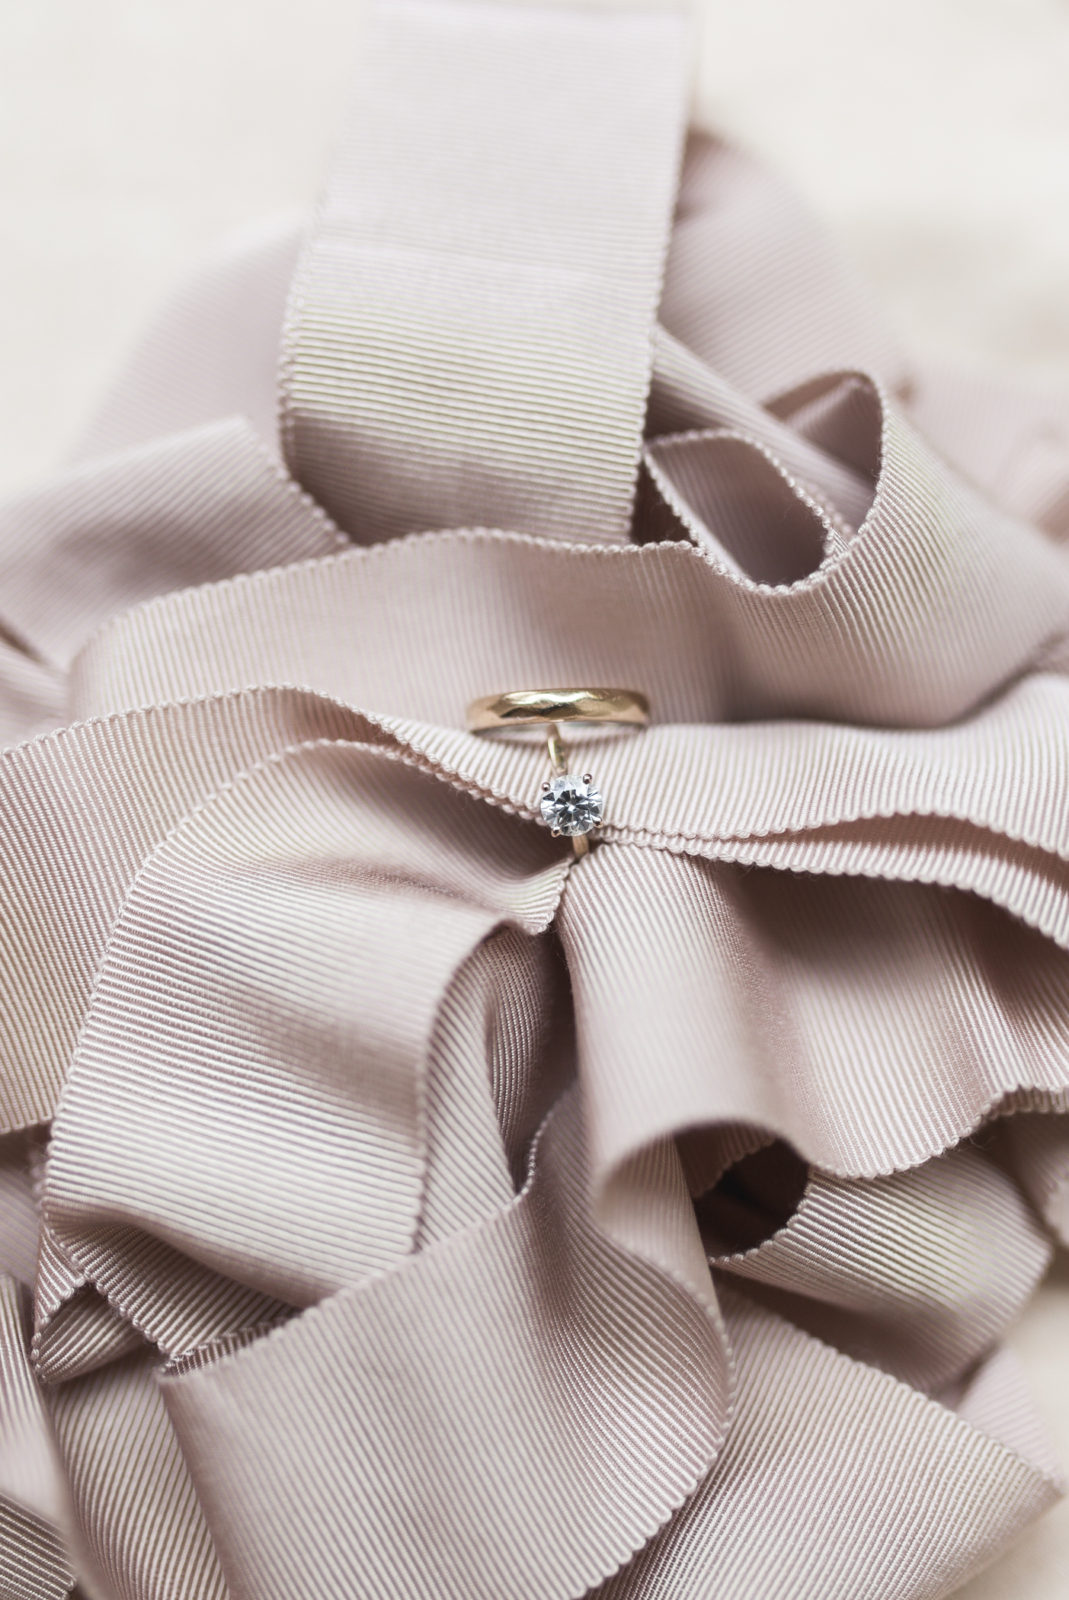 Shane Co. diamond engagement ring and wedding band in ribbons